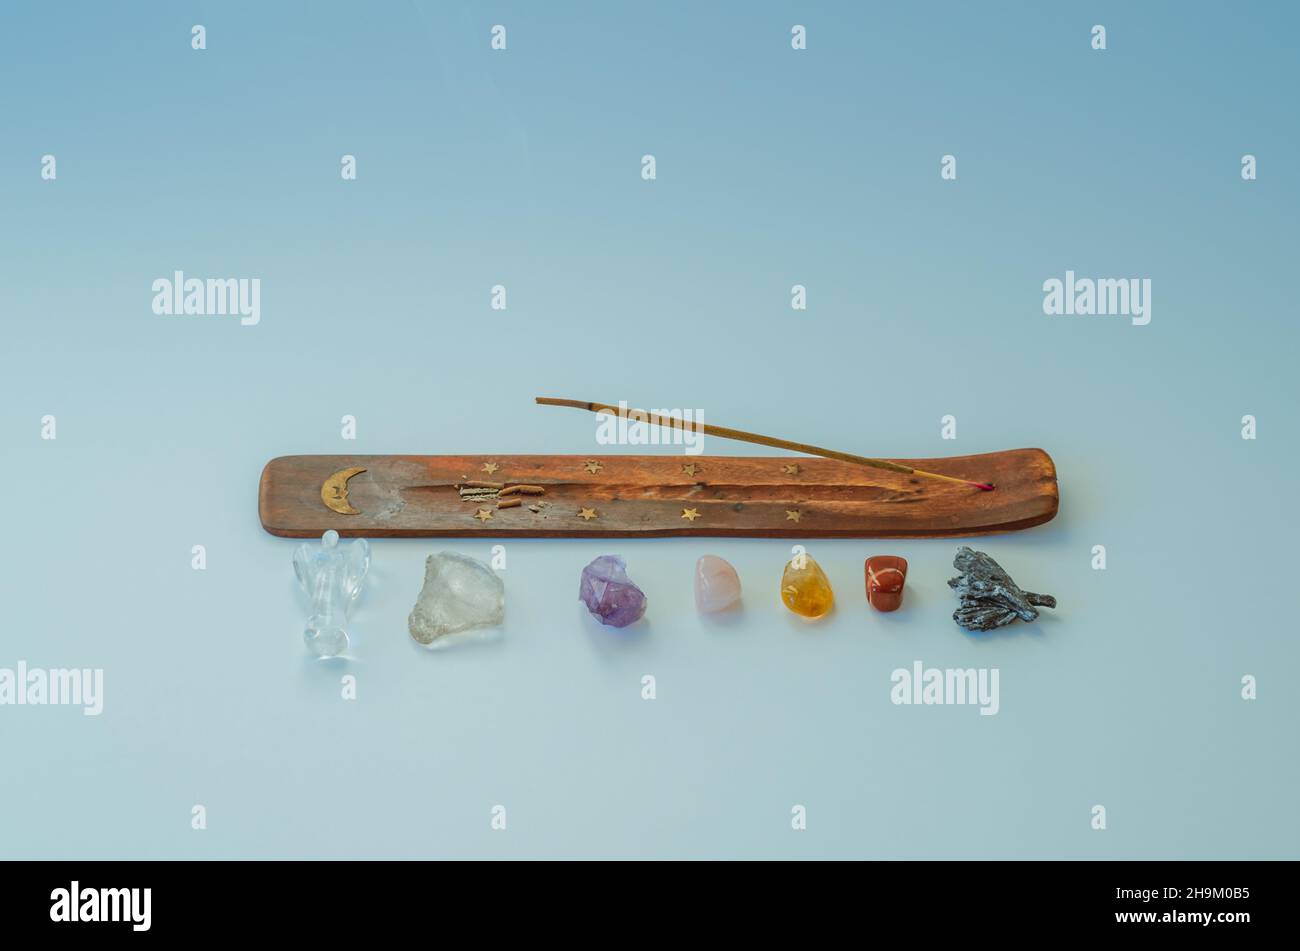 Flat lay of incense stick burning and 7 healing crystals aligned by chakra on blue background Stock Photo